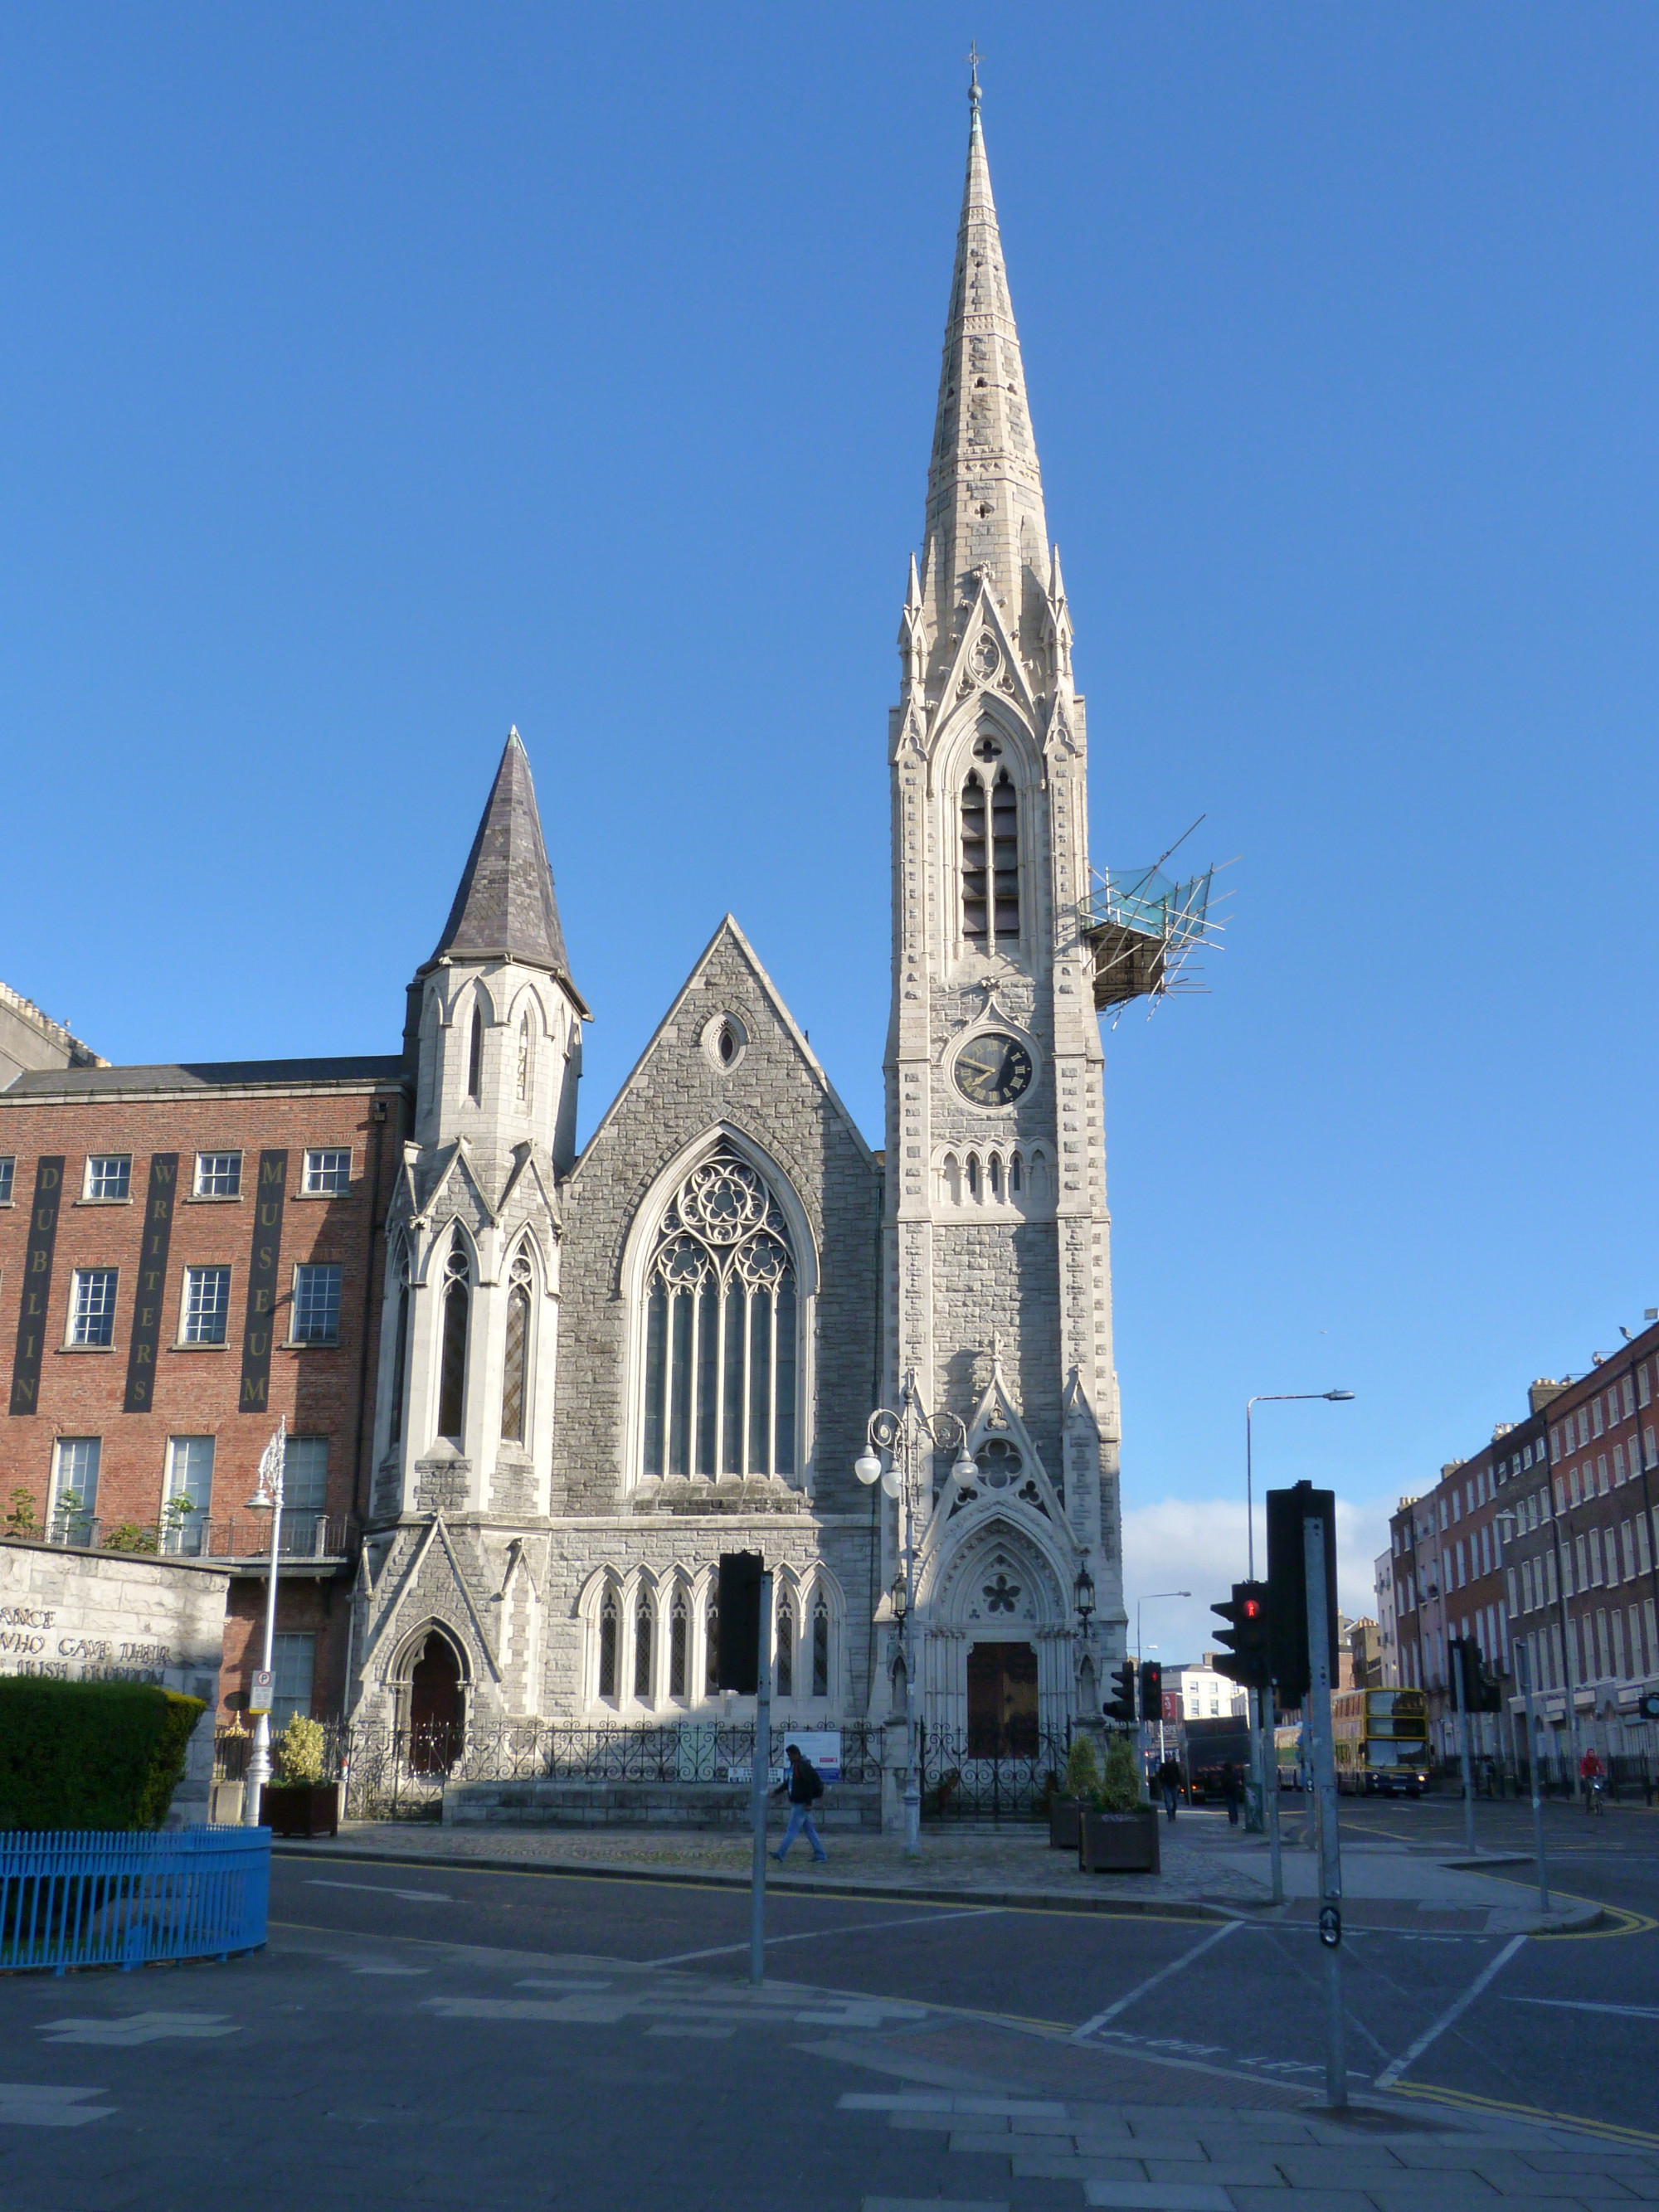 Findlater's Church, Parnell St.